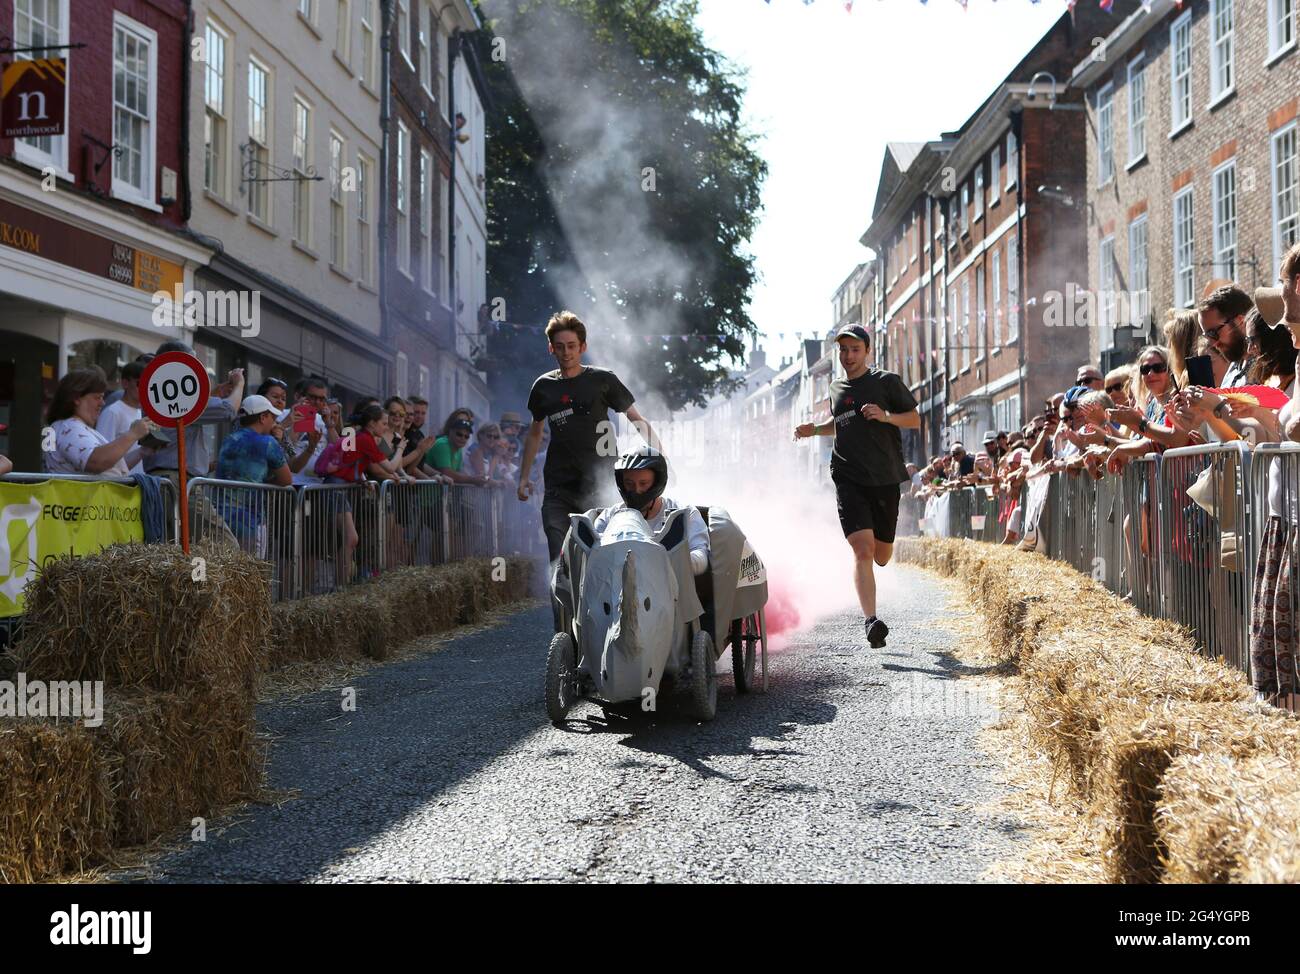 The 2019 Micklegate  Soapbox Challenge, an annual cart race in York, Yorkshire,England. The race involves local people building hand made carts. Stock Photo